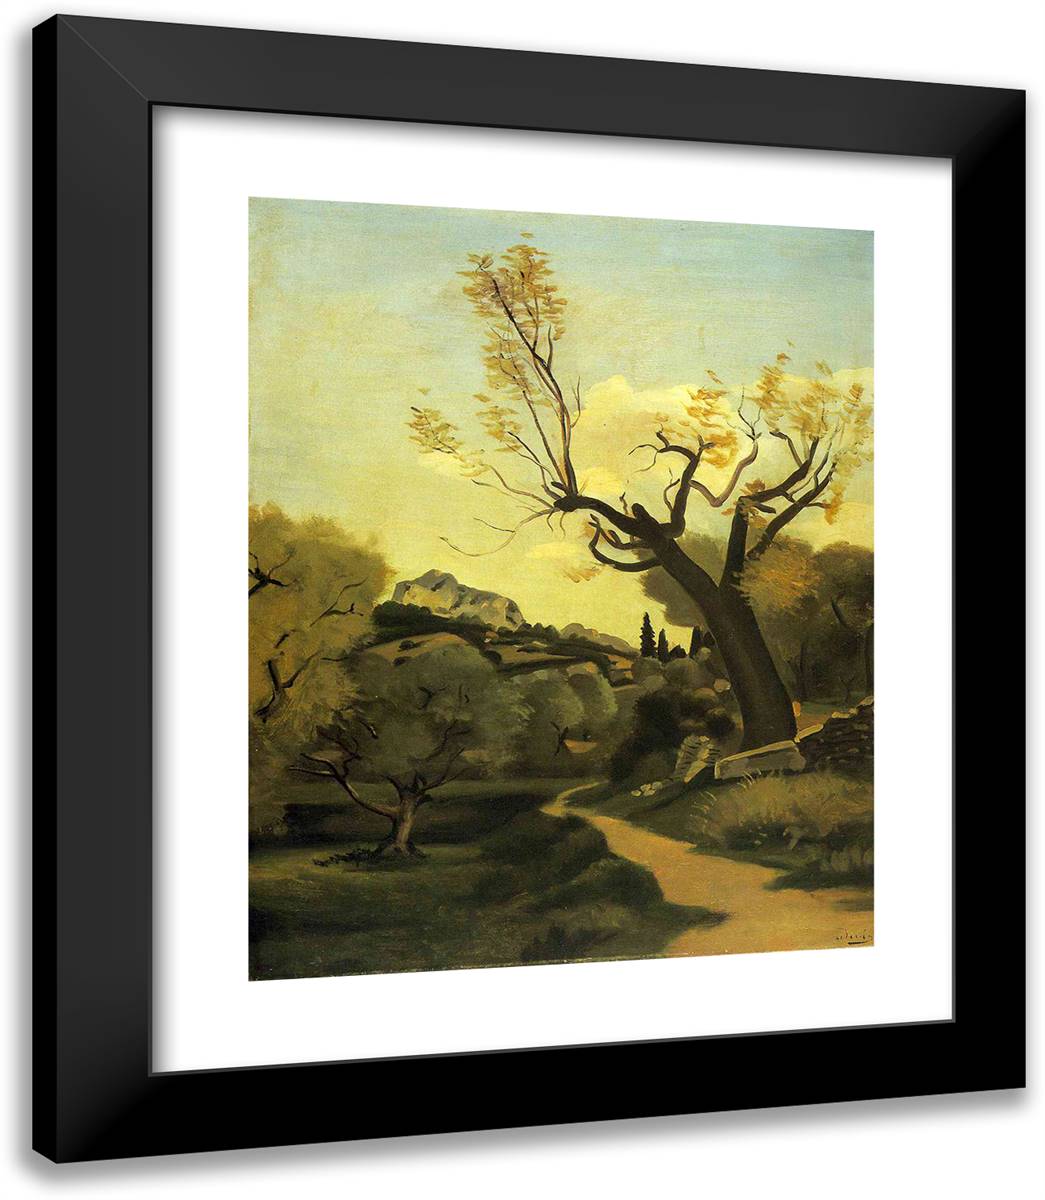 The Road and the Tree  20x23 Black Modern Wood Framed Art Print Poster by Derain, Andre